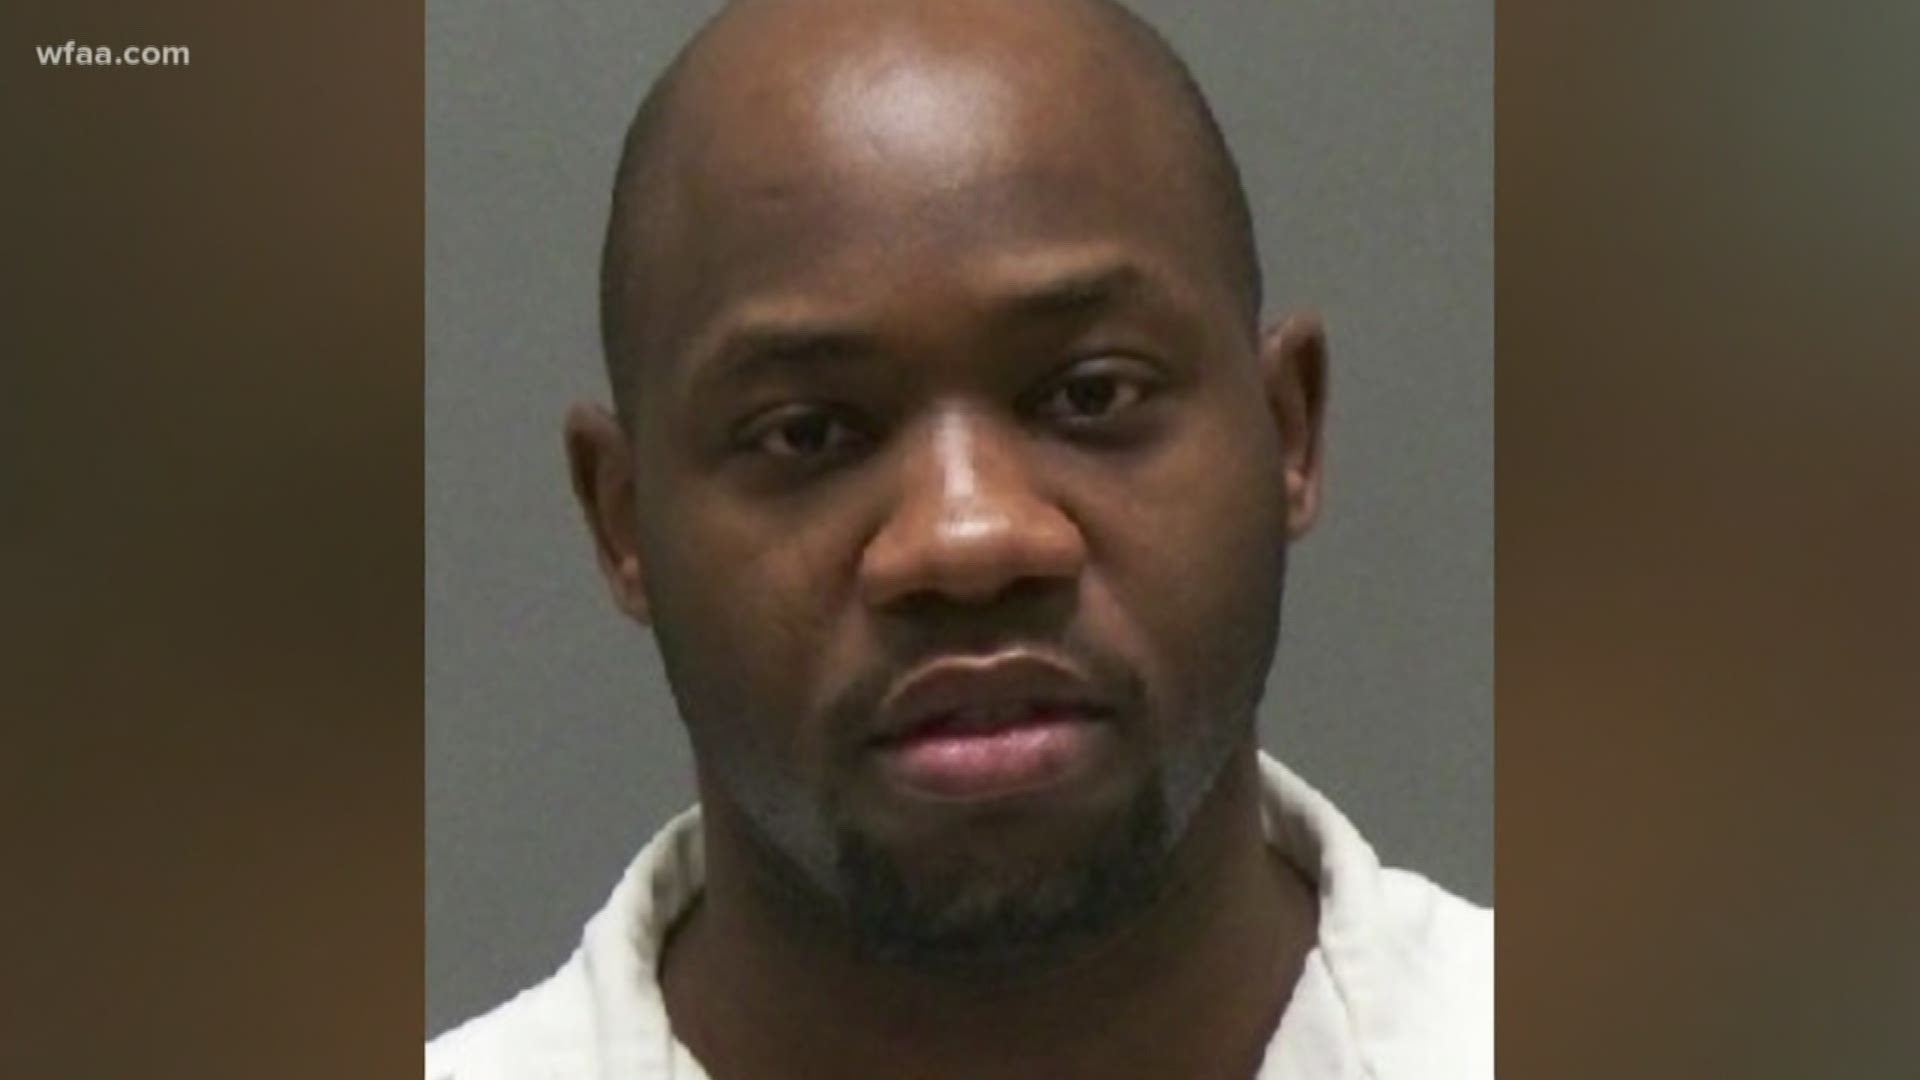 Fort Worth police believe a man facing a capital murder charge and two charges of sexual assault may be connected to other unsolved rapes. Lee Dexter Joiner, 31, is accused of killing a 53-year-old woman around 1:30 a.m. Sept. 7.